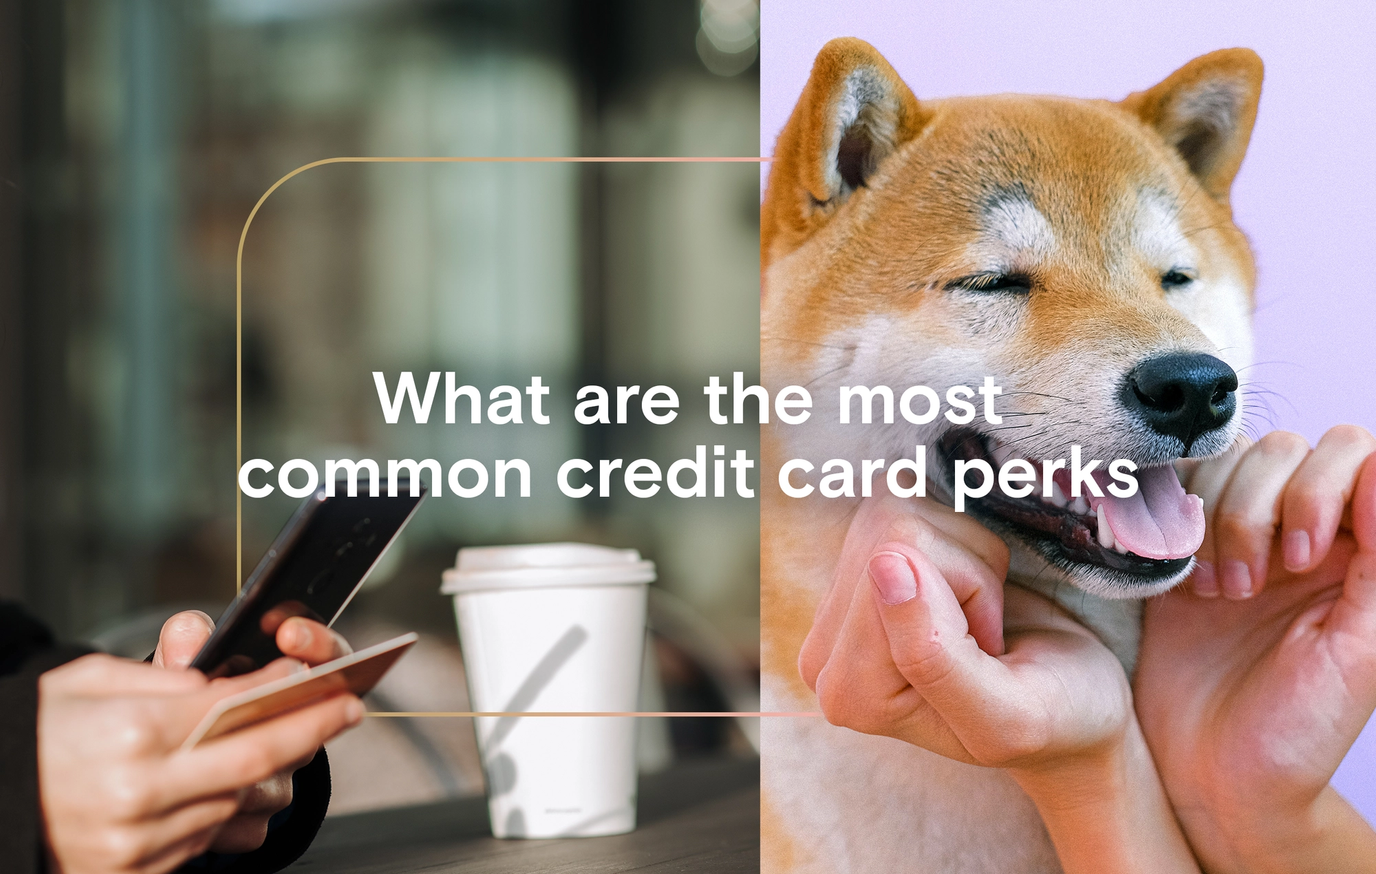 What are the most common credit card perks?